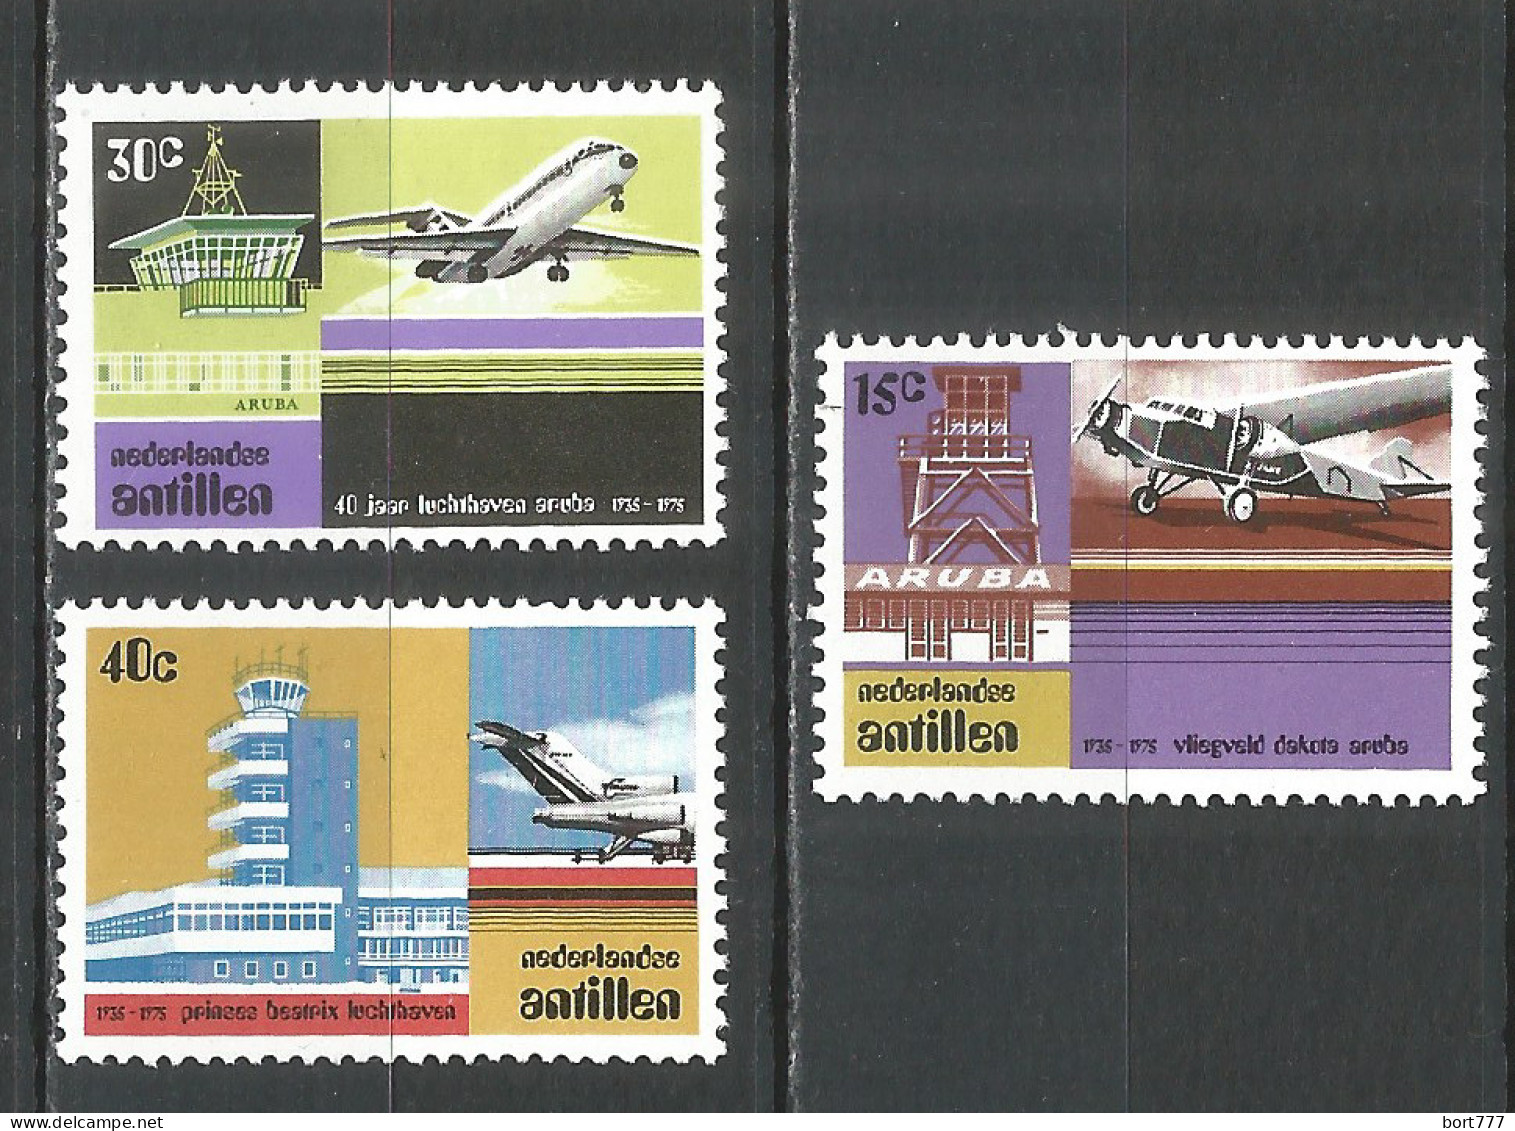 Netherlands Antilles 1975 Year , Mint Stamps MNH (**)  Michel# 301-303 - Curacao, Netherlands Antilles, Aruba